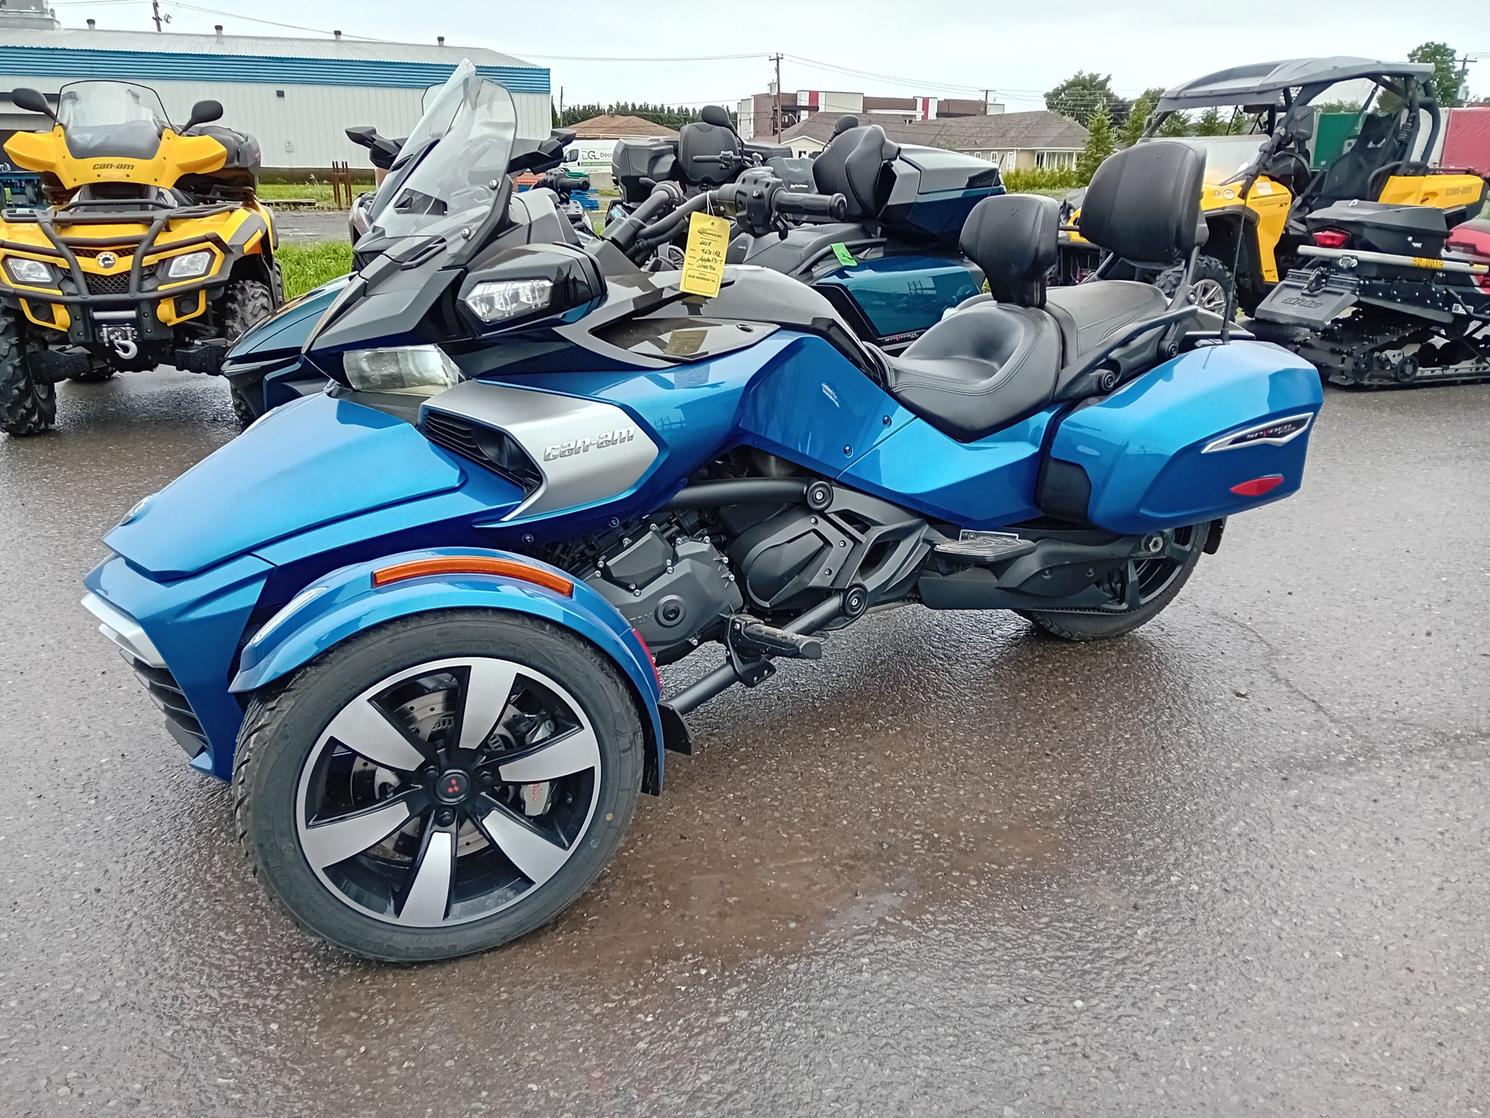 Can-Am SPYDER 2018 - F3T